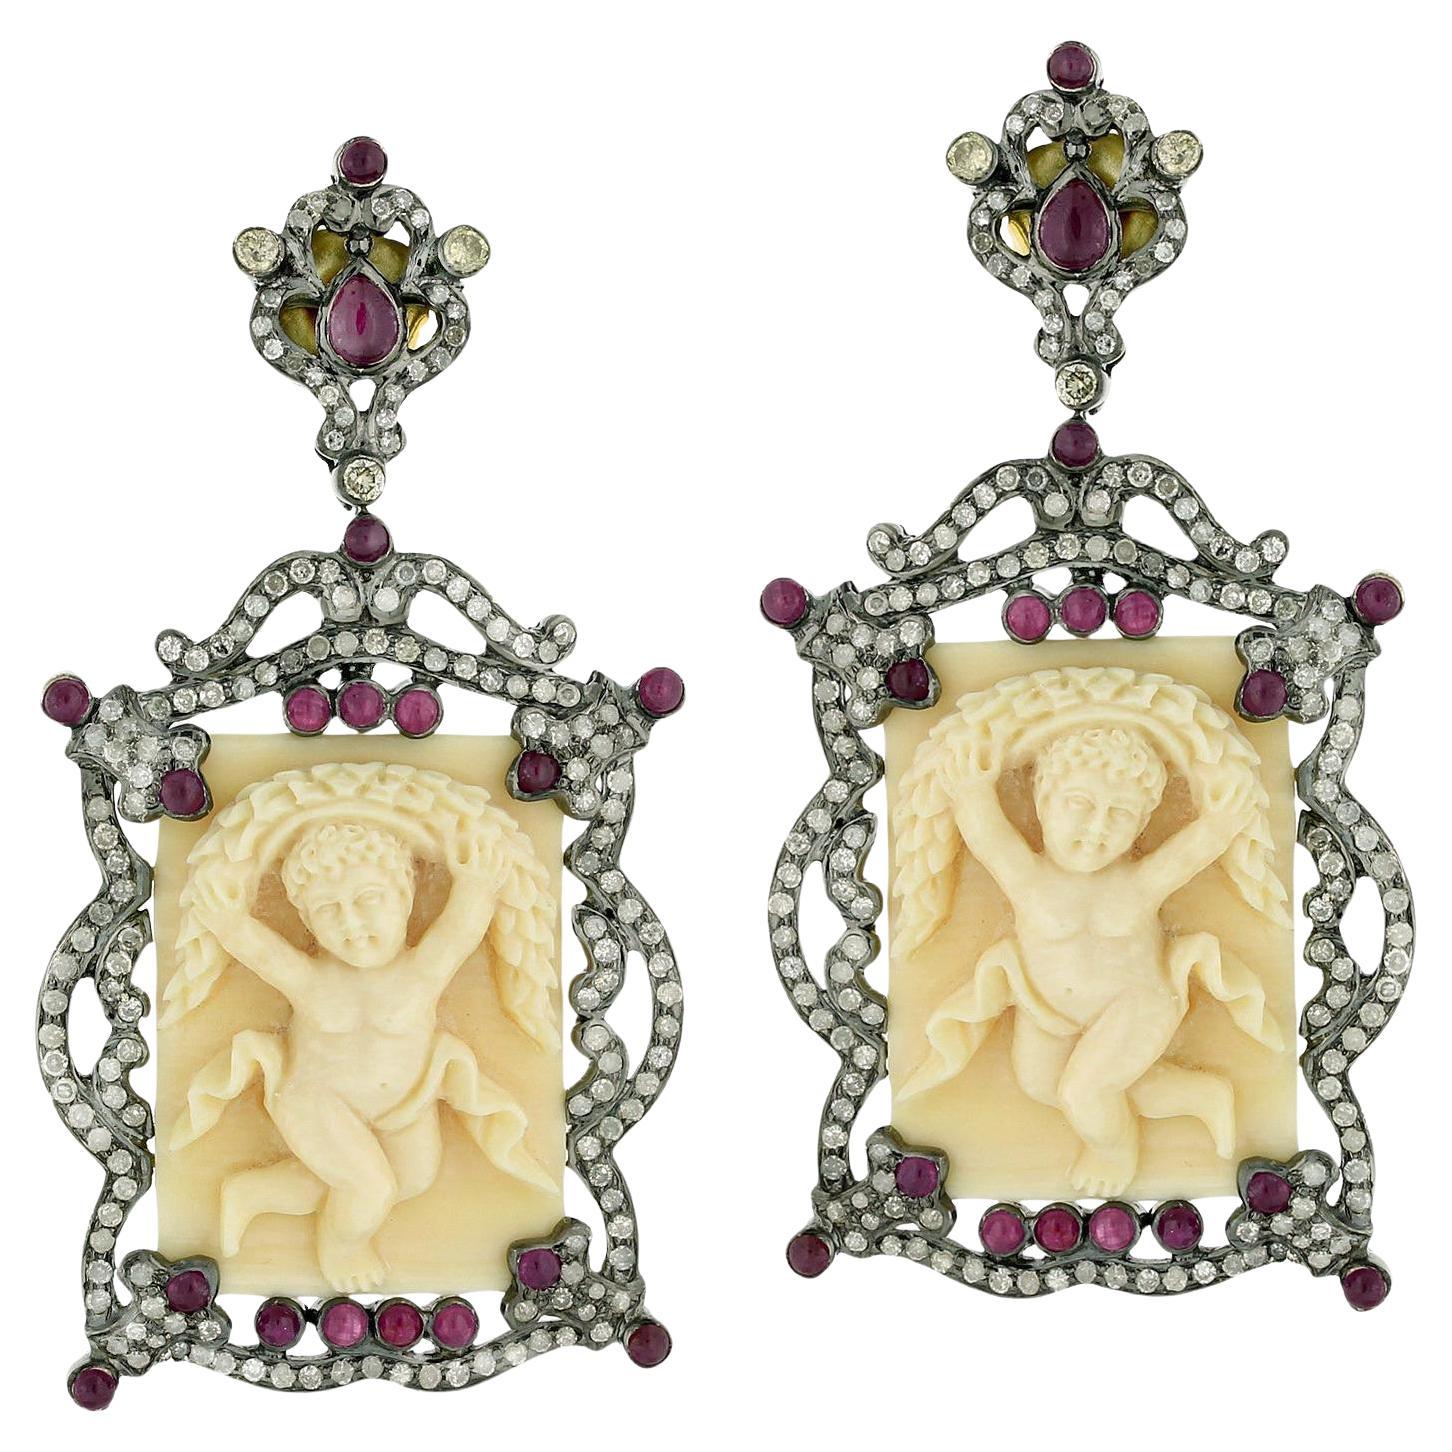 Carved Bone Dangle Earrings With Rubies and Diamonds 65.6 Carats